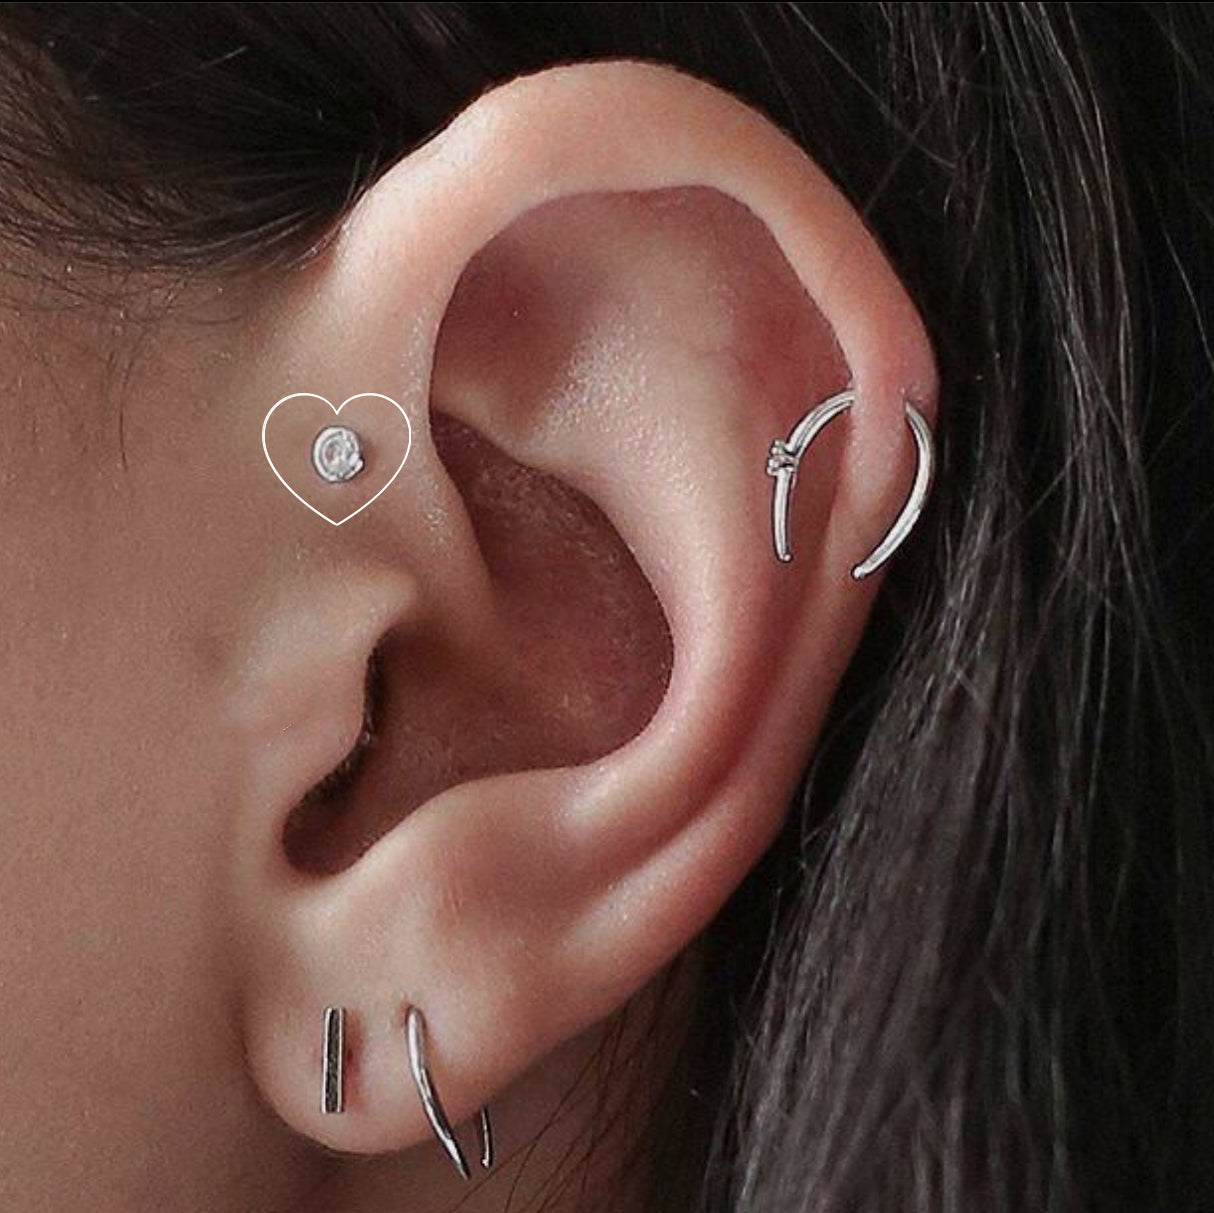 Helix Piercing Guide: Everything You Need | Maison Miru